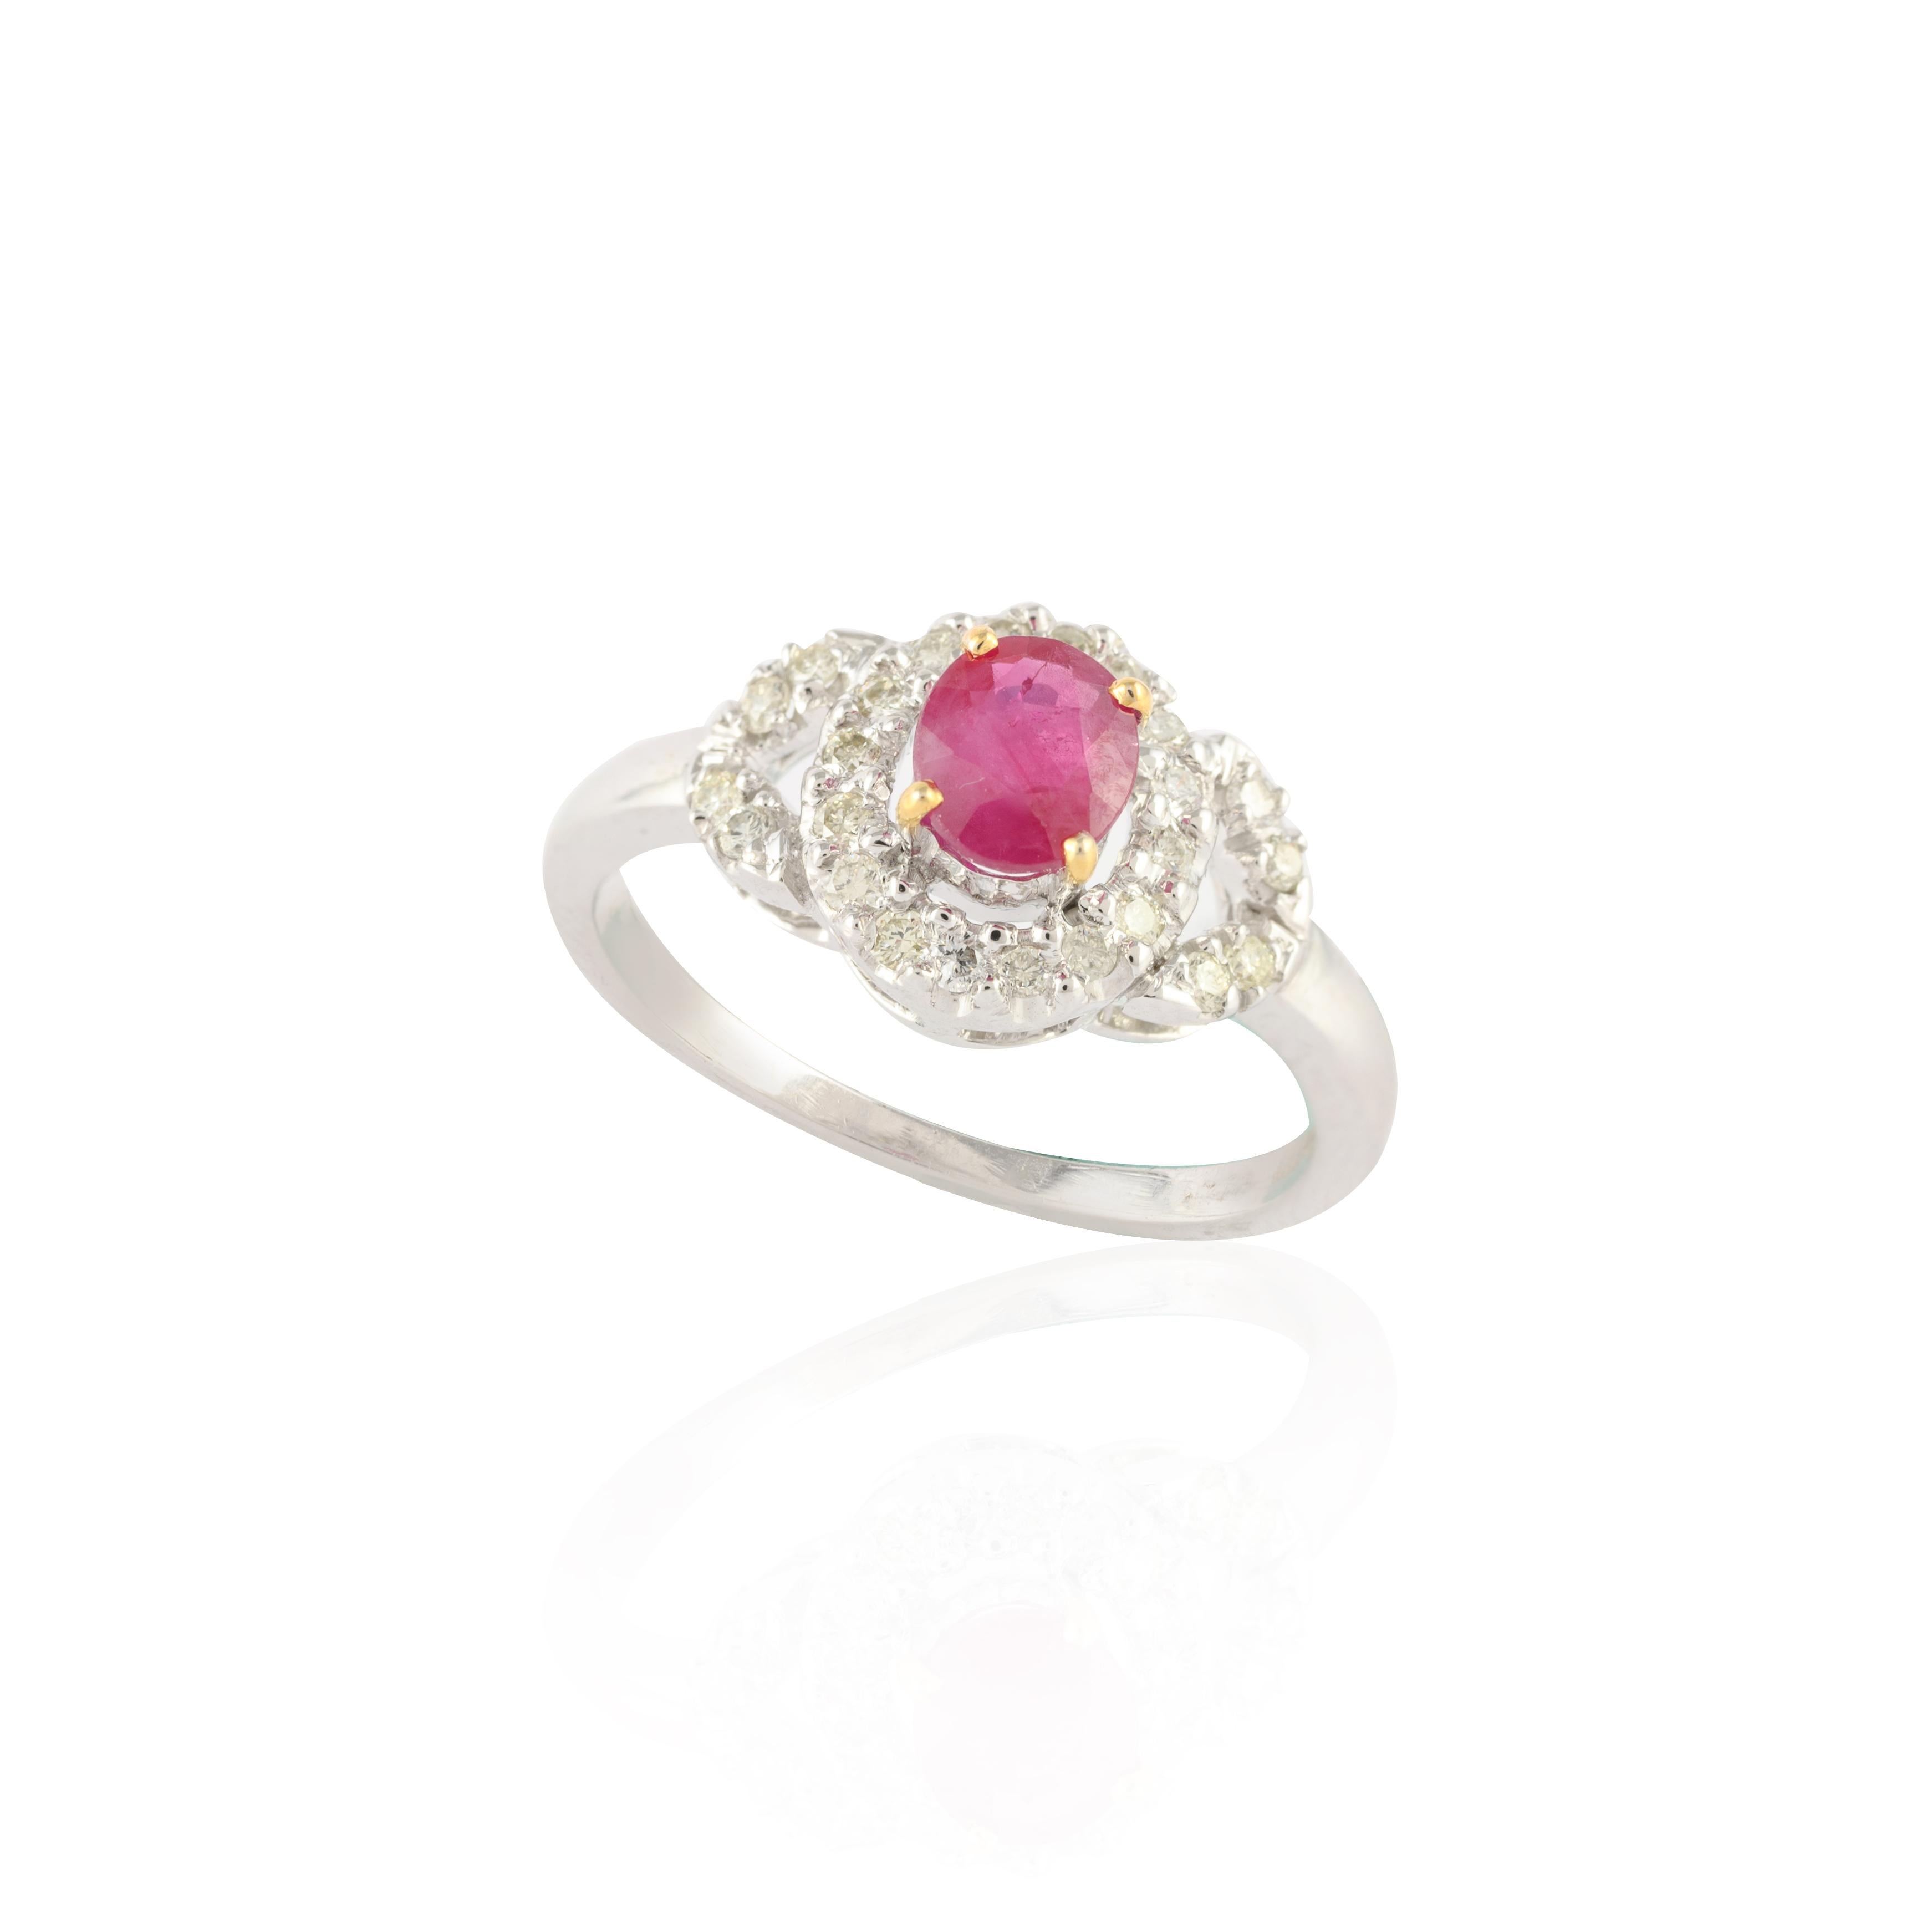 For Sale:  Diamond Ruby Women Bridal Ring in 14K Solid White Gold 9